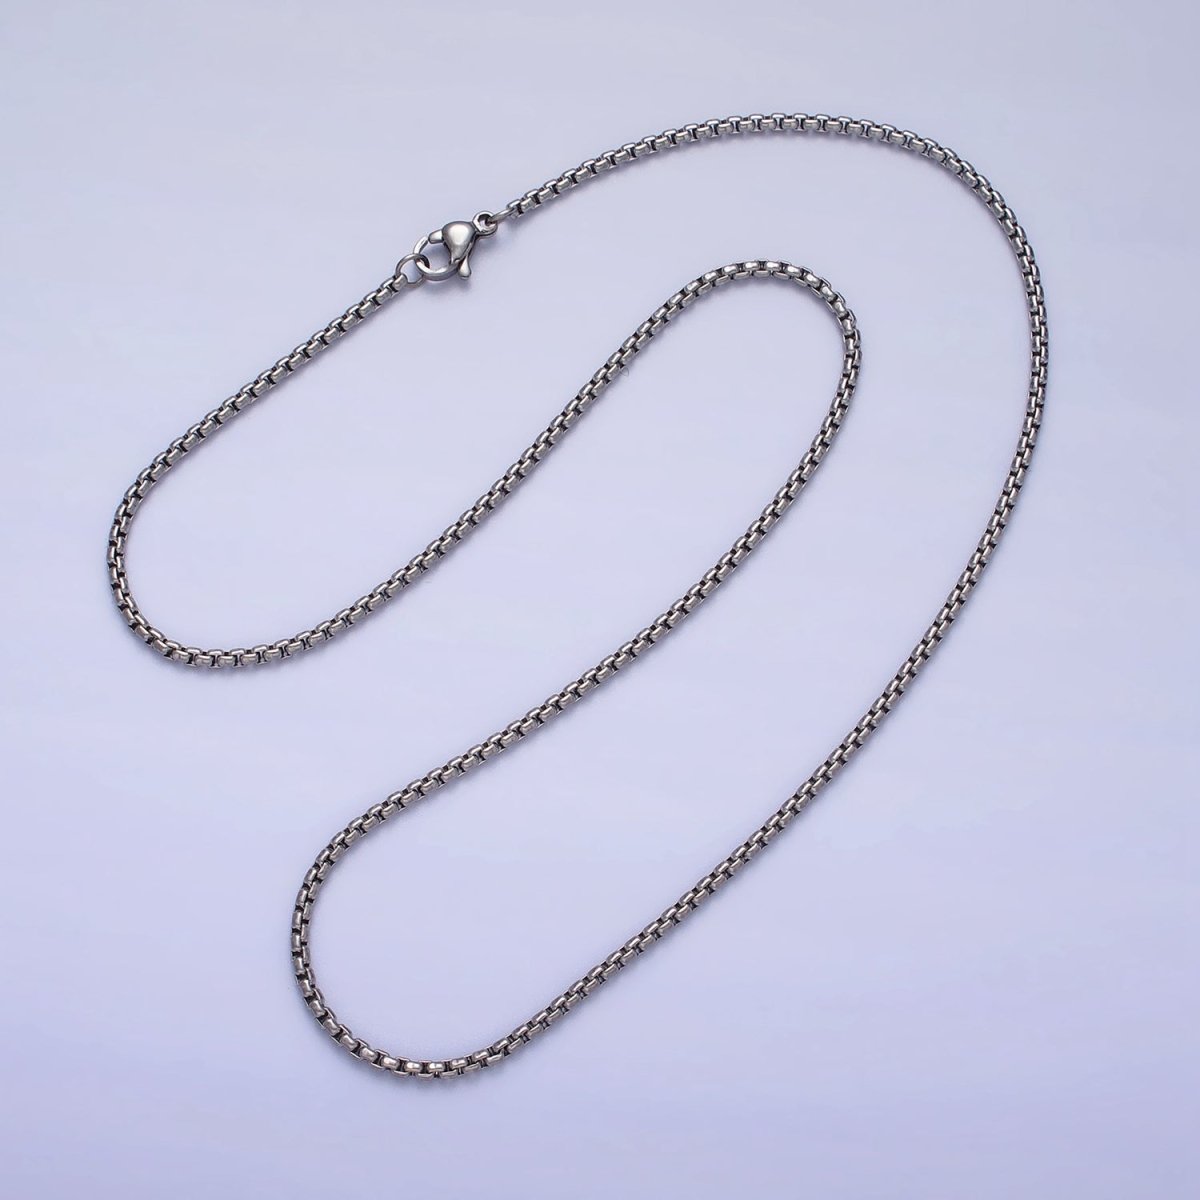 Dainty Gold Cable Rolo Chain Necklace | Waterproof | Unisex Silver Box Chain | Anti Tarnish | STAINLESS STEEL Chain | WA-1710 to WA-1712 Clearance Pricing - DLUXCA